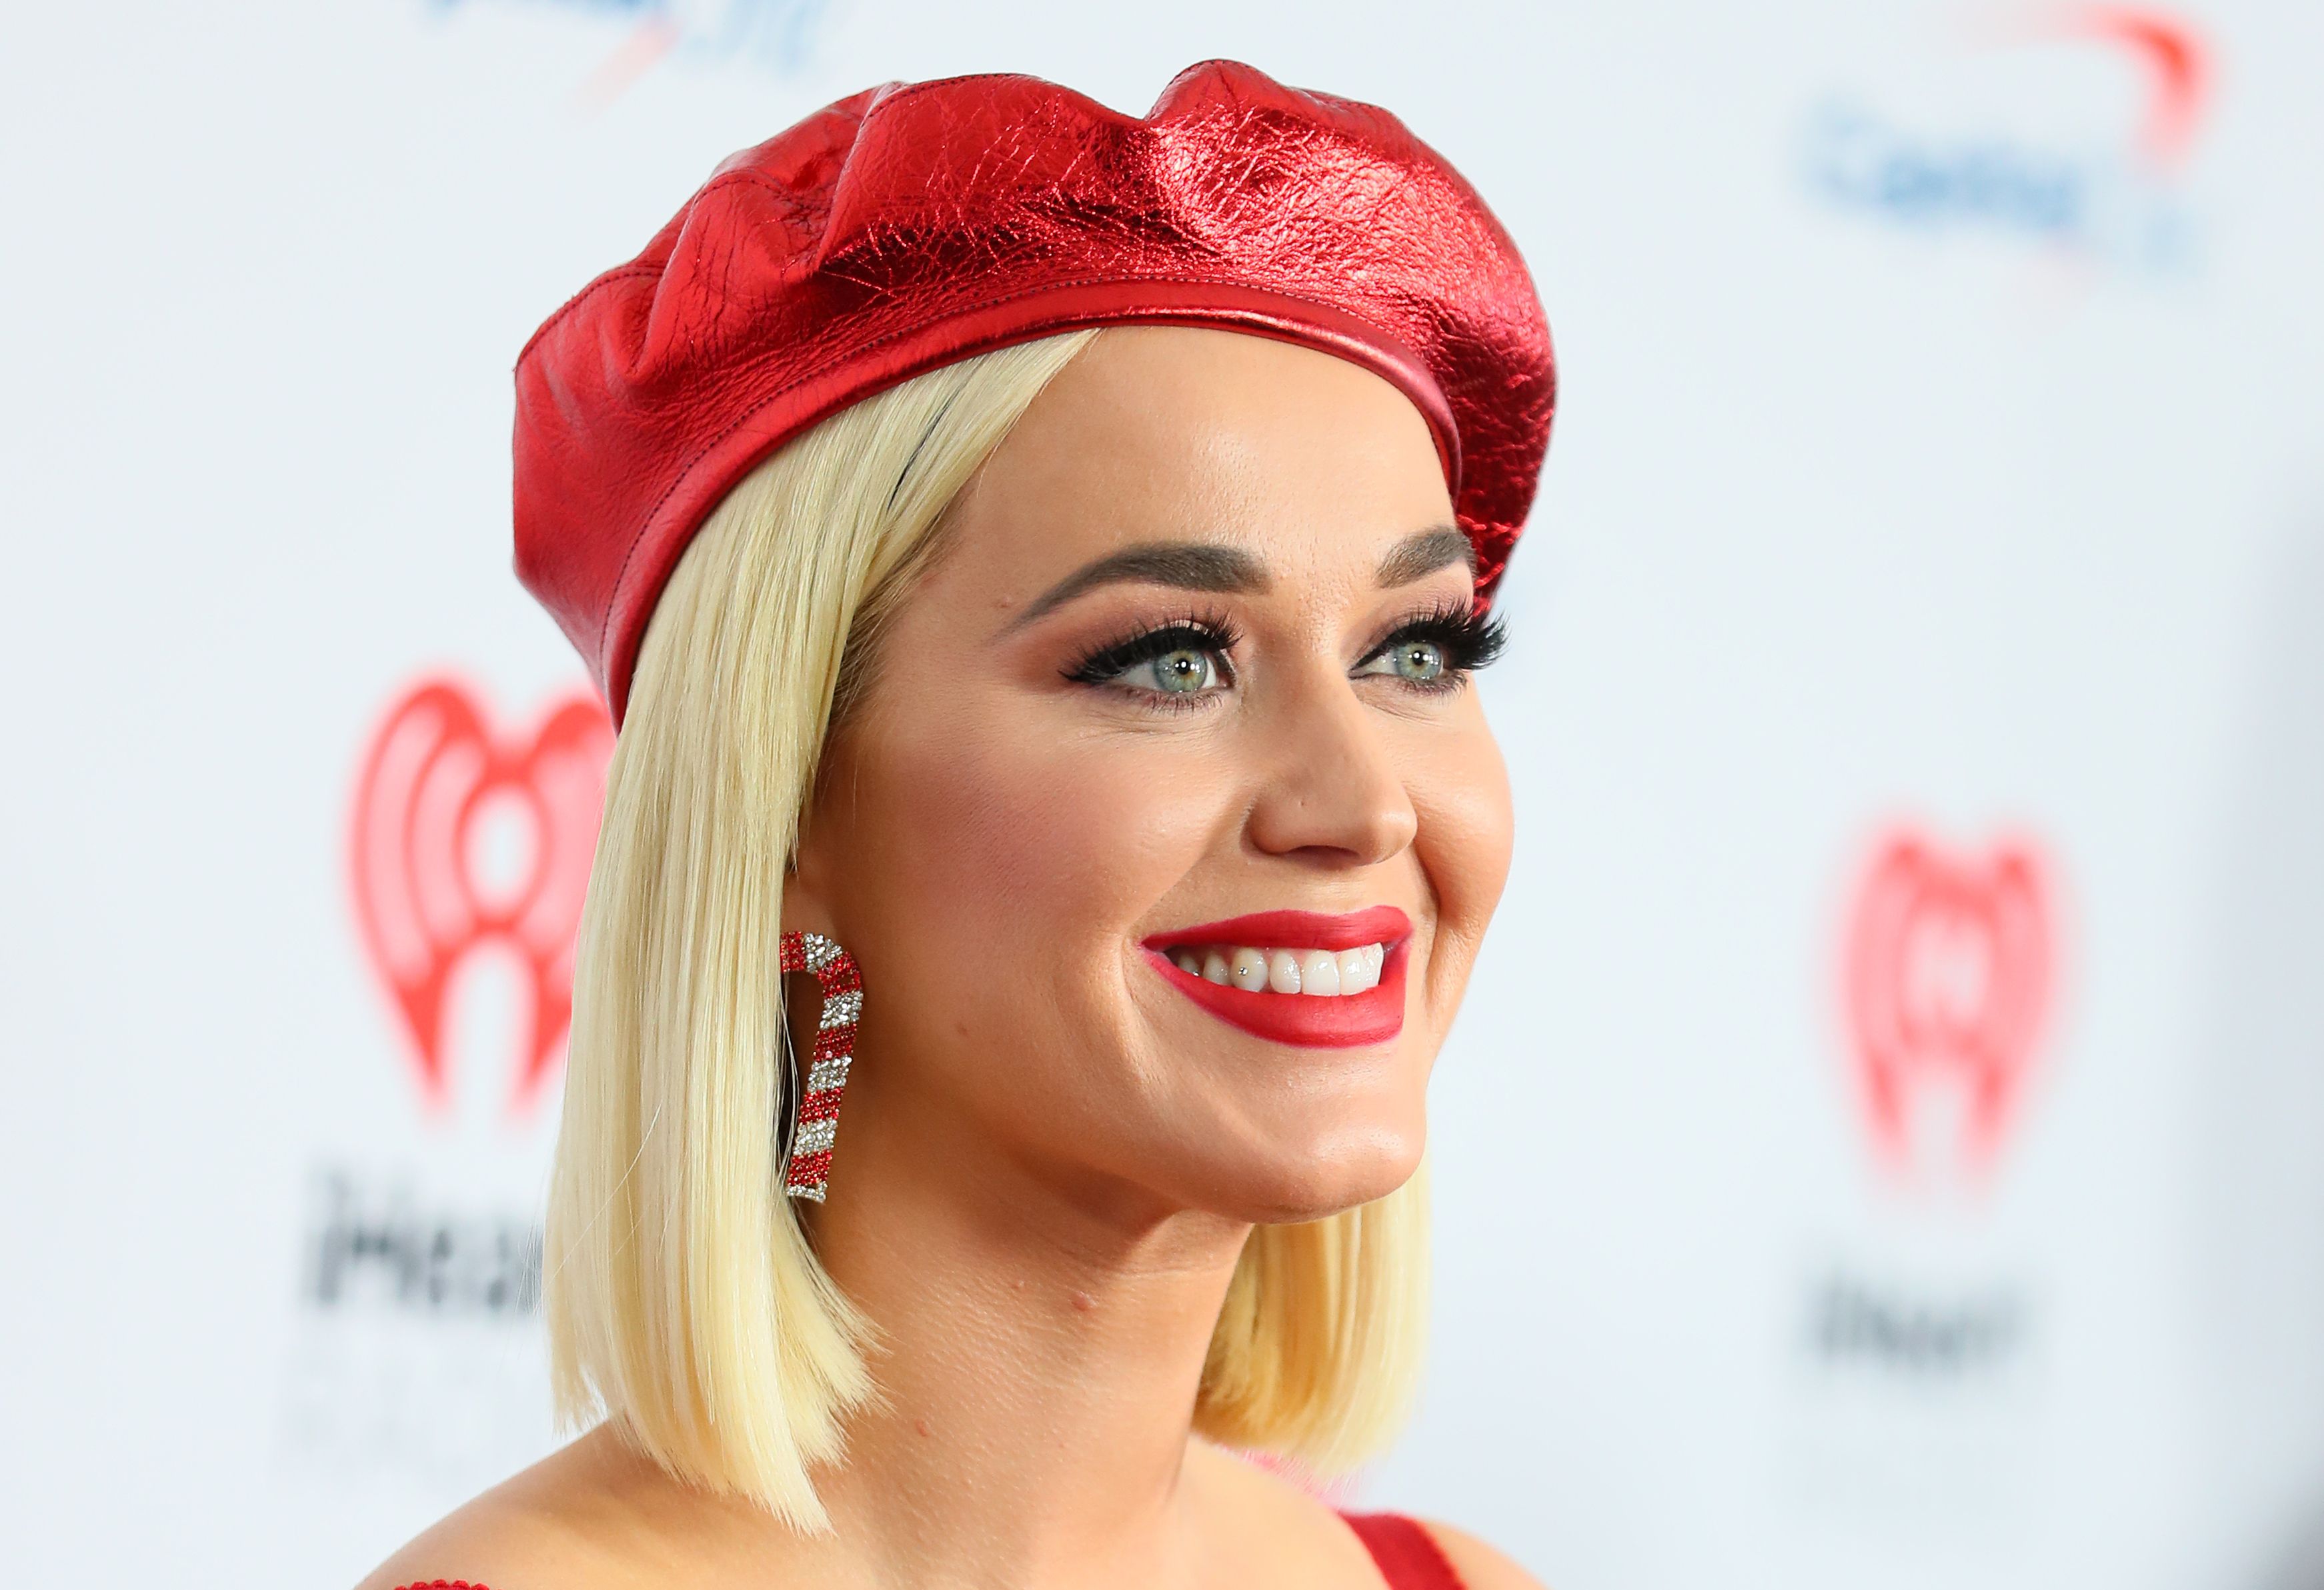 katy perry biography in english